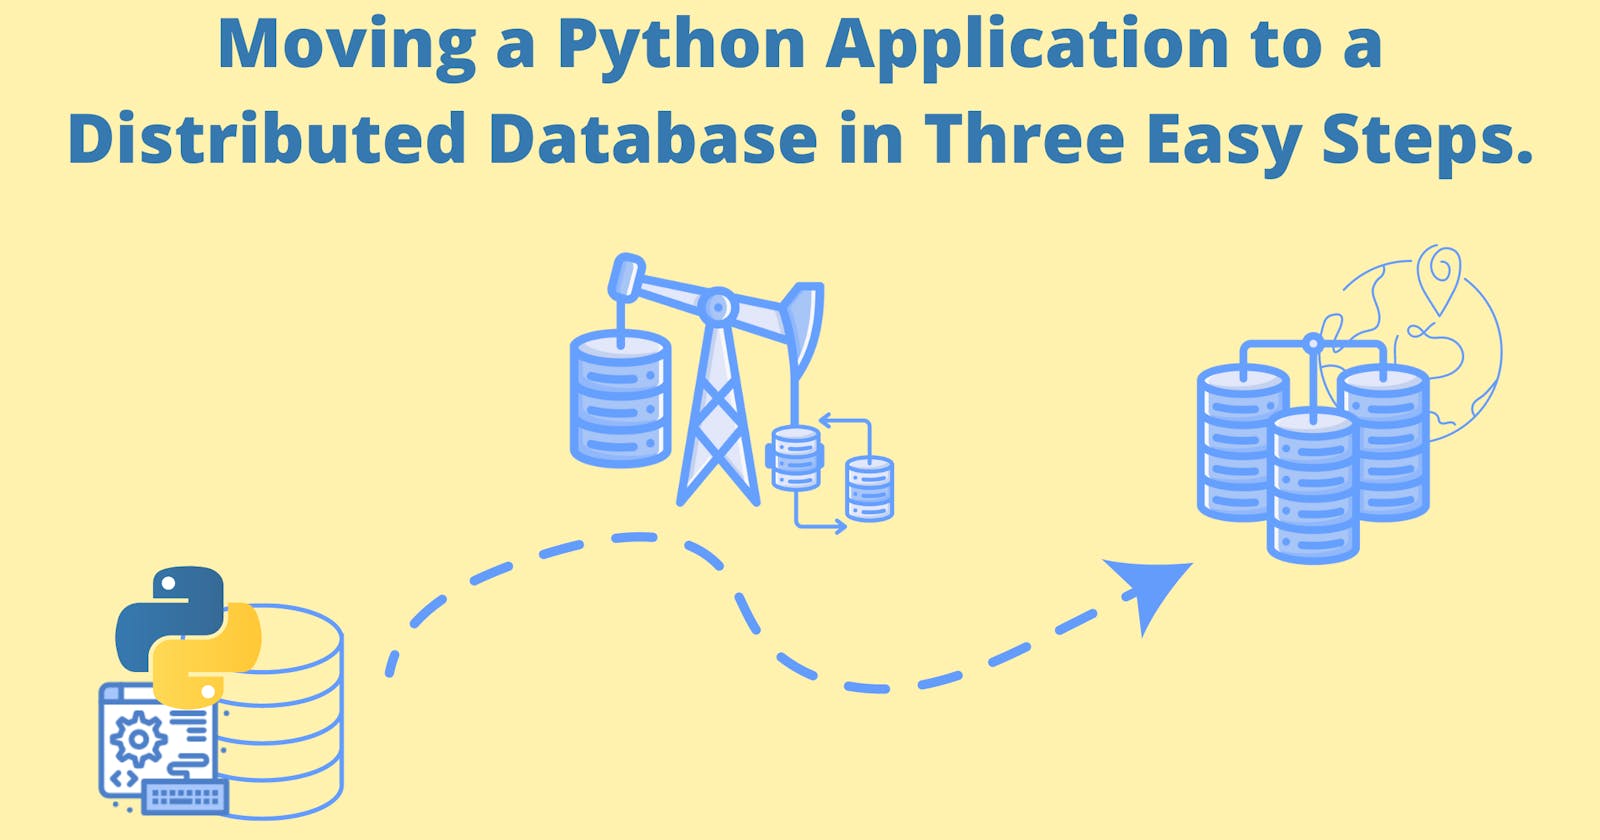 Moving a Python Application to a Distributed Database in Three Easy Steps.